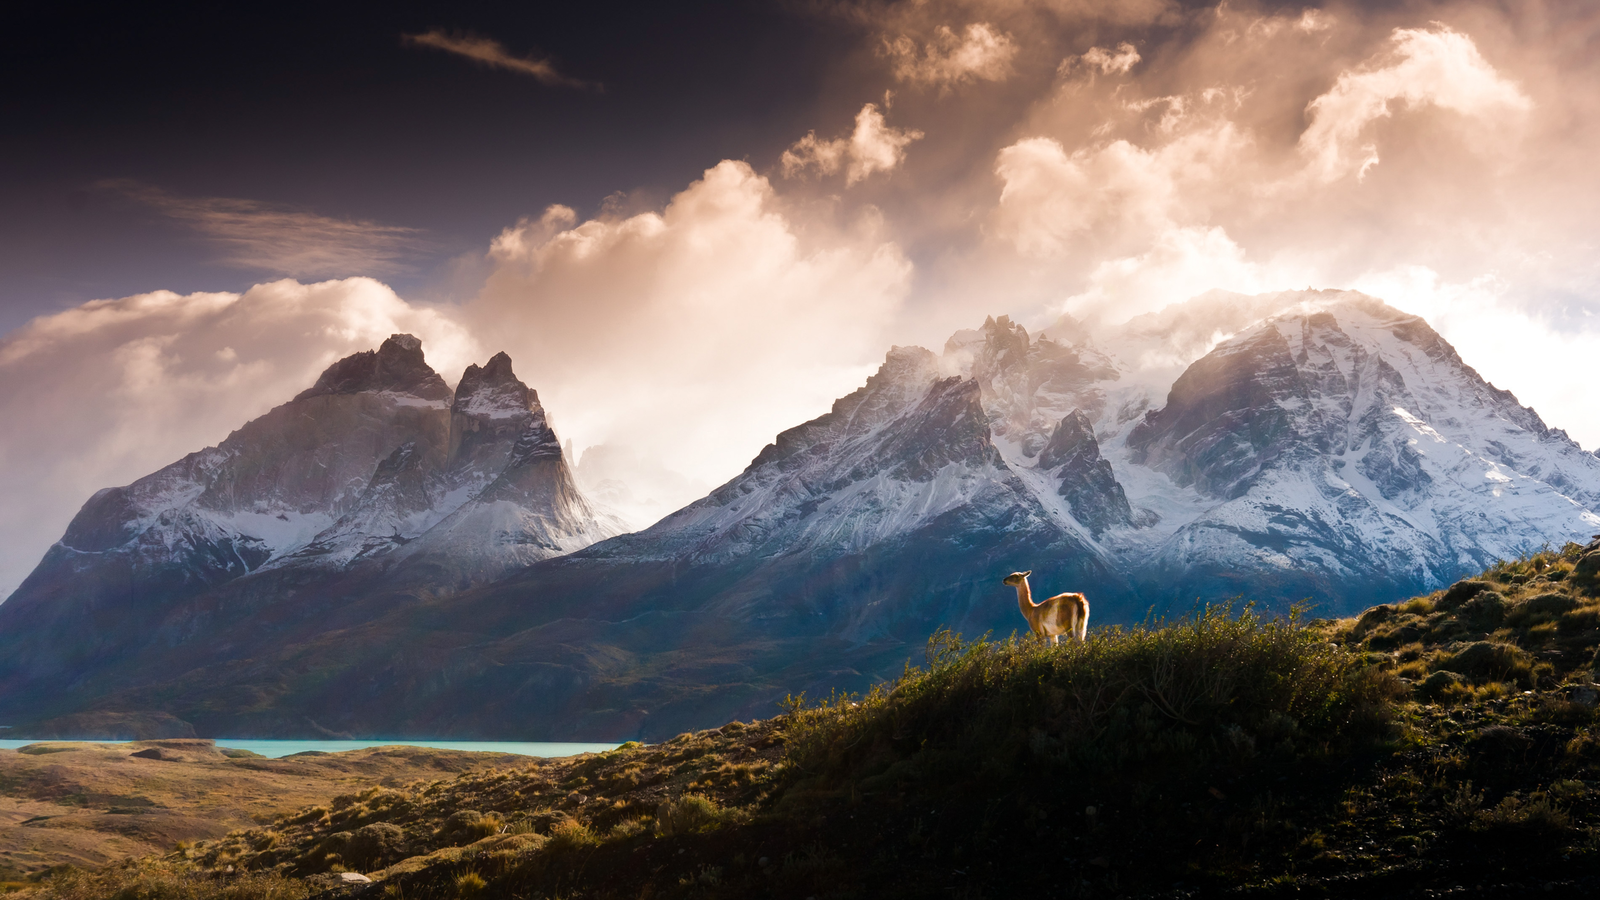 A lone guanaco looks out over majestic Cuernos del Paine in Chilean Patagonia (photo by Gene Warlich) - The mountains, Guanaco, Patagonia, Reddit